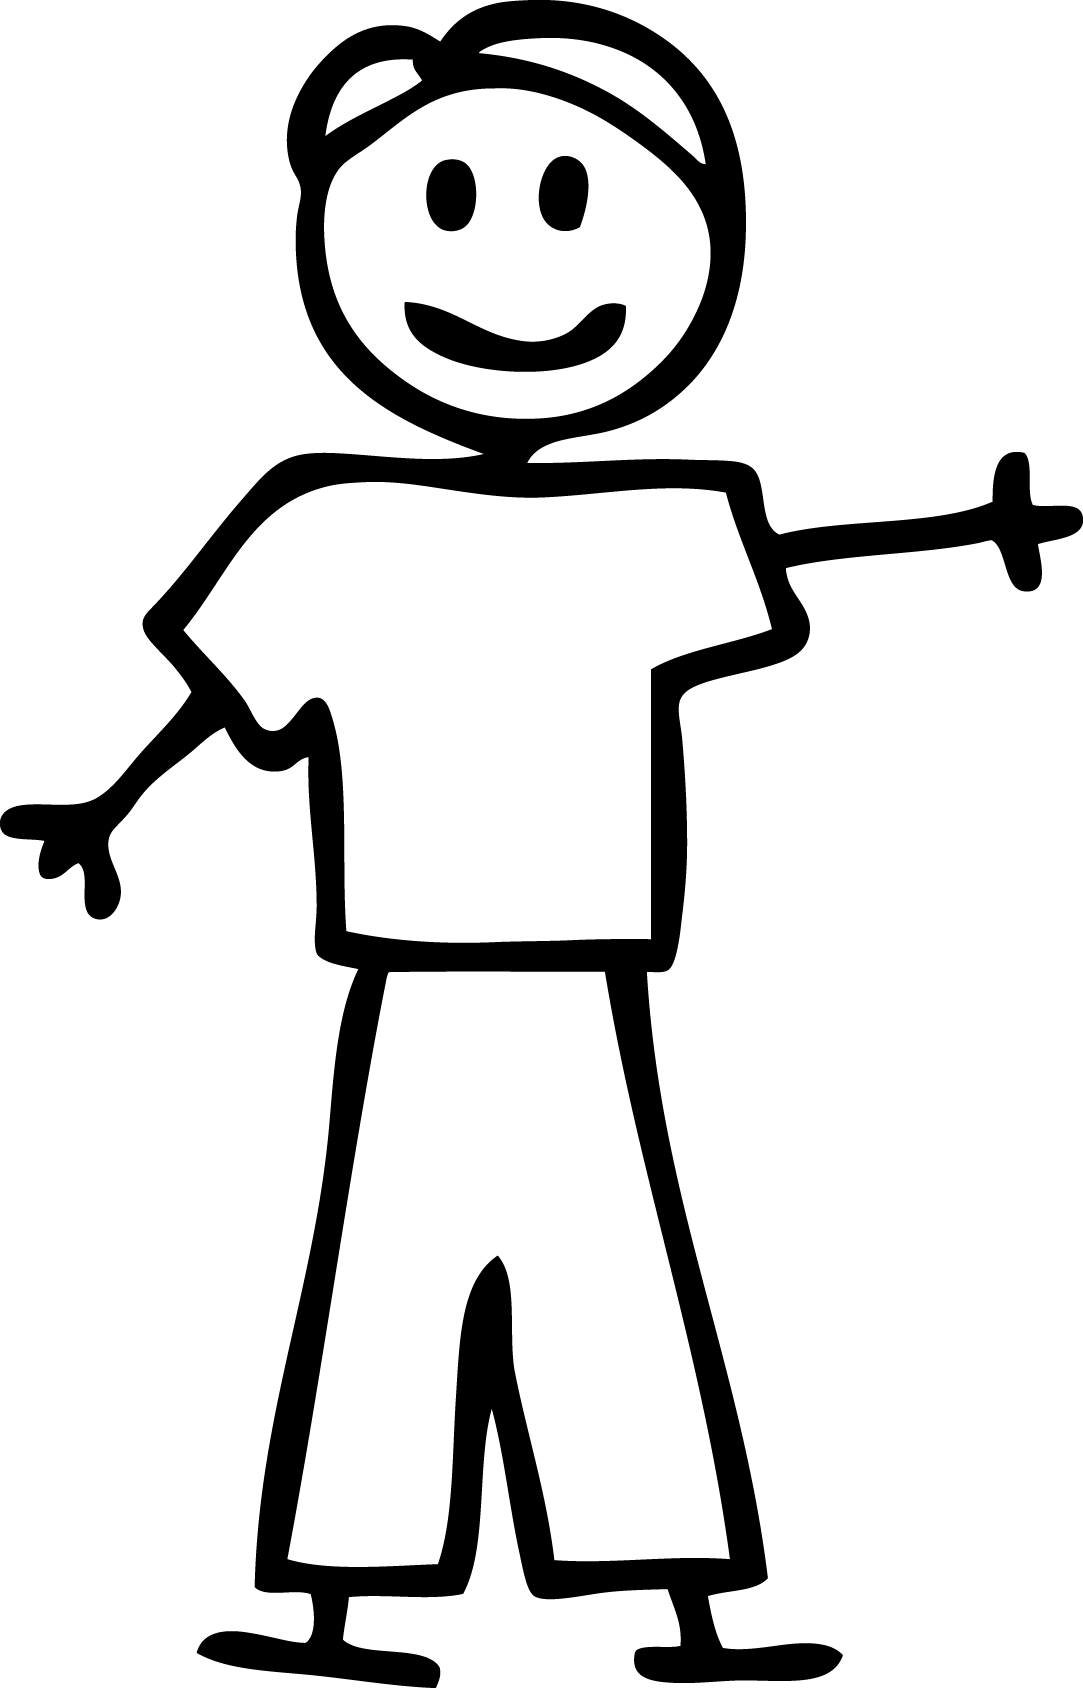 Collection of Stick Figure PNG HD. PlusPNG